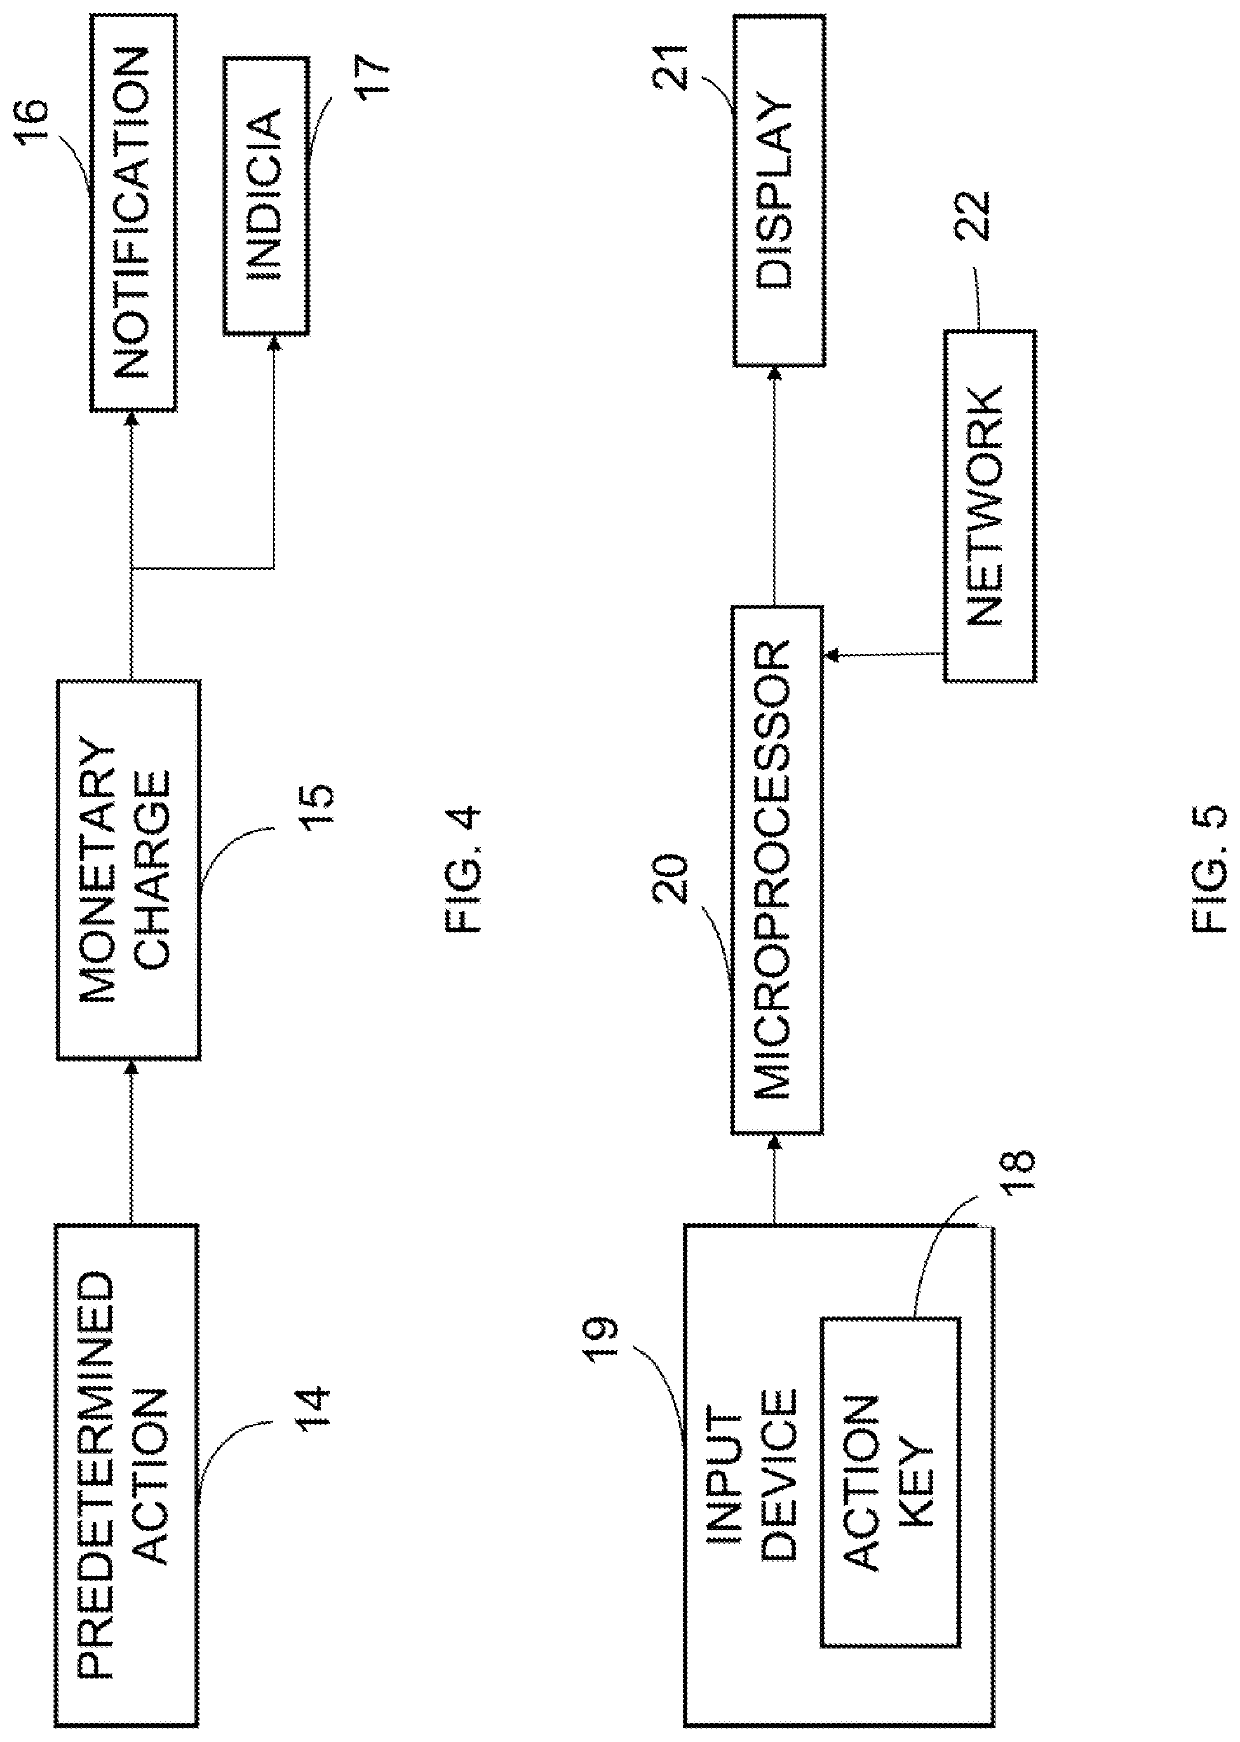 System and method of controlling access to a document file